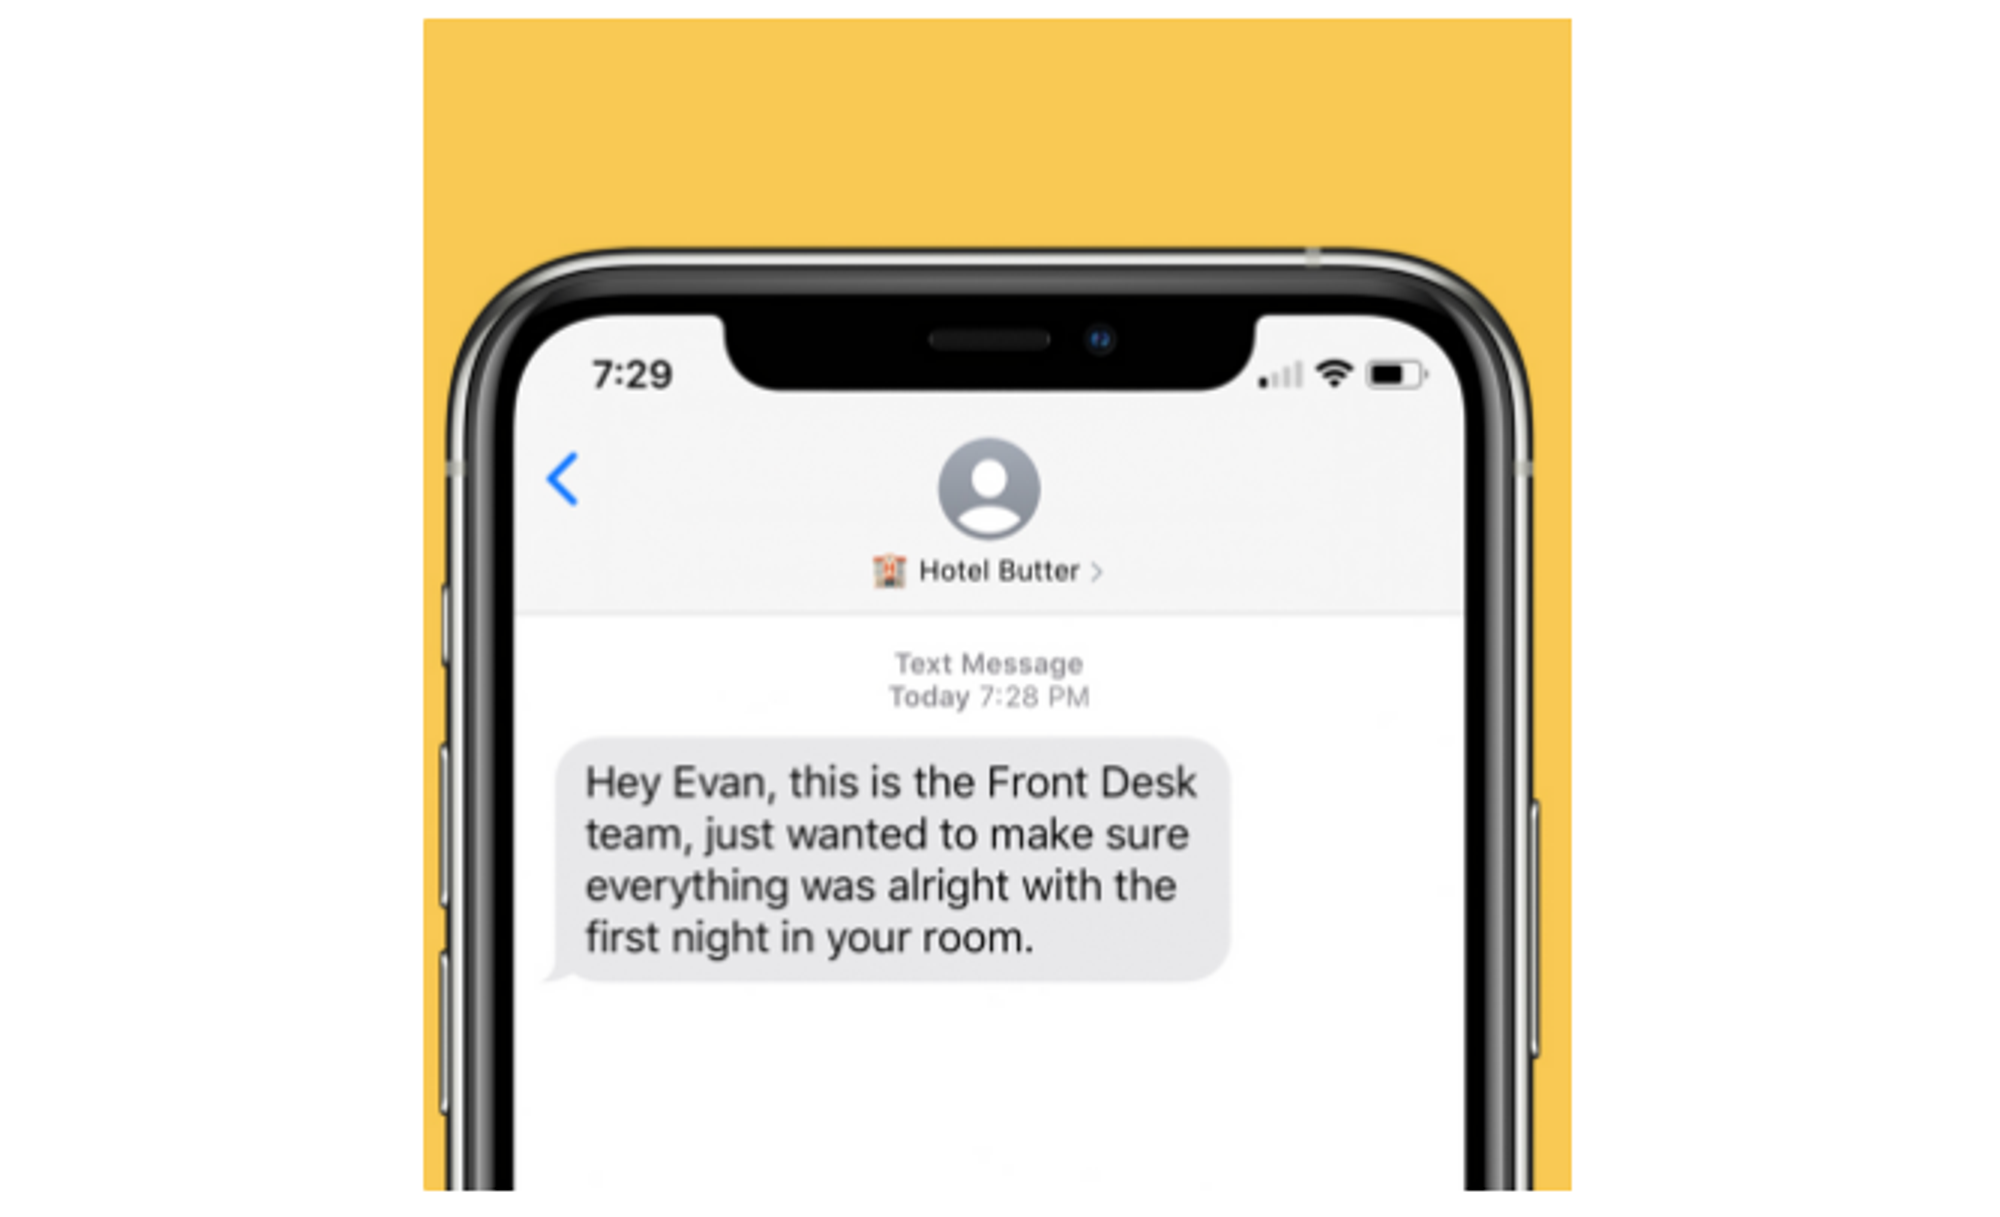 Example of how a scheduled message will appear to a guest.